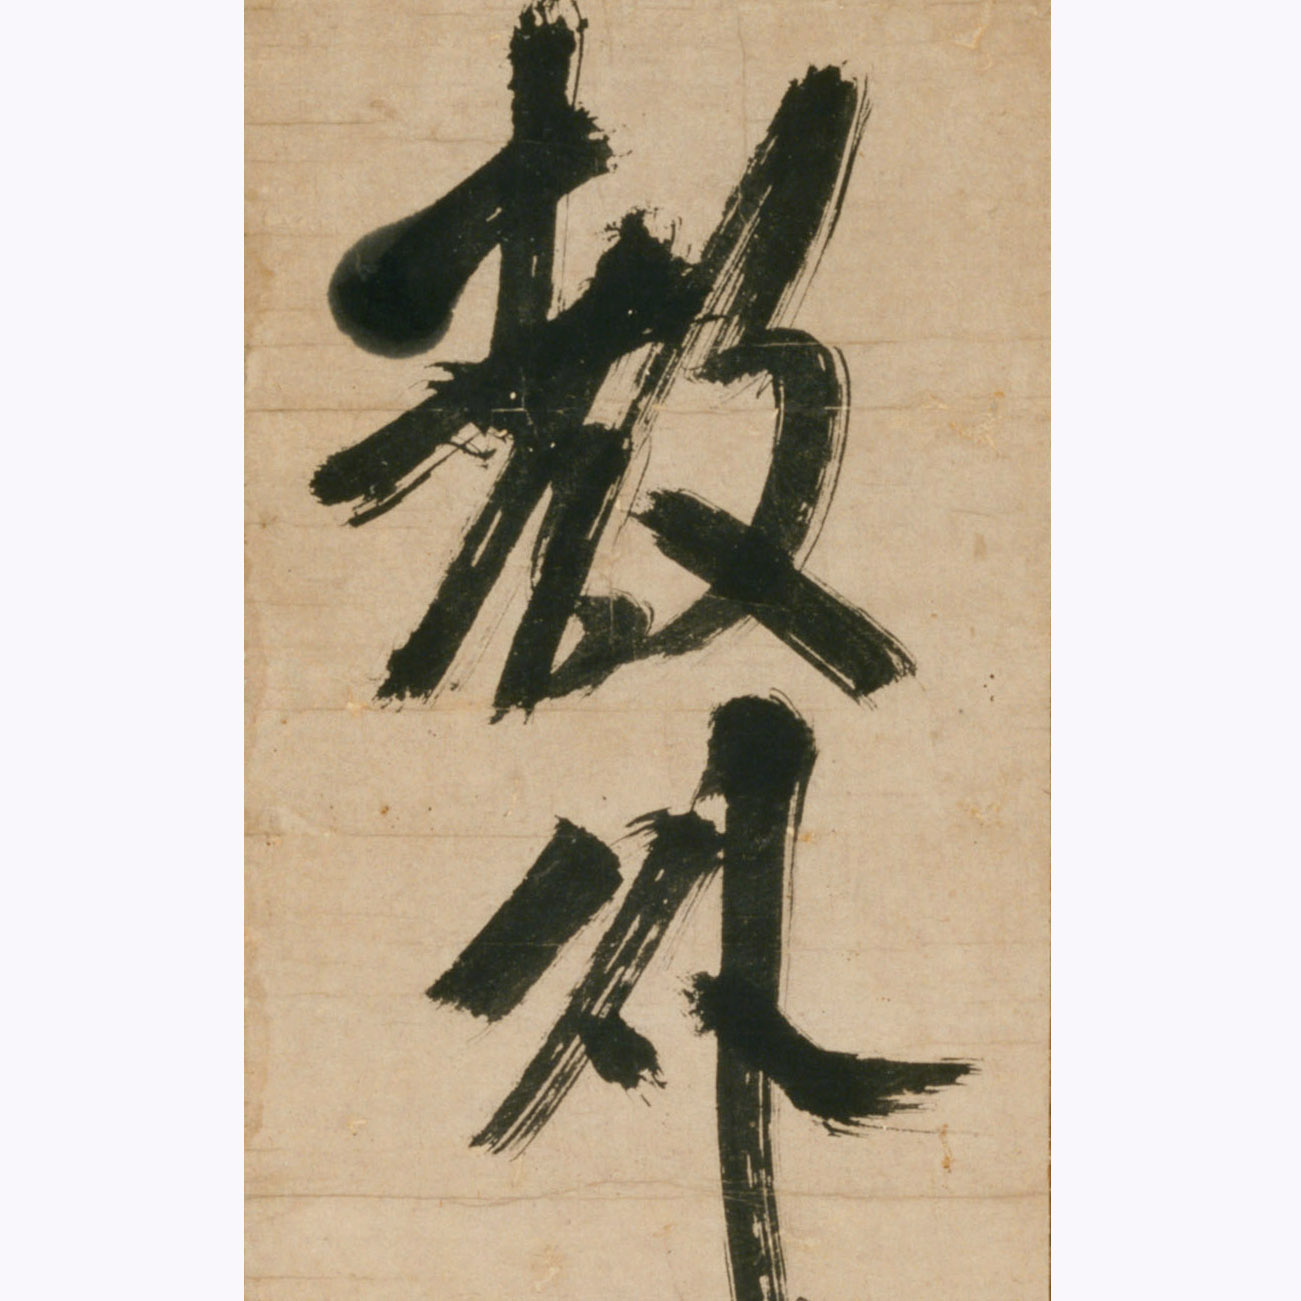 Image of "Calligraphy in One Line, By Ikkyu Sojun, Muromachi period, 15th century"